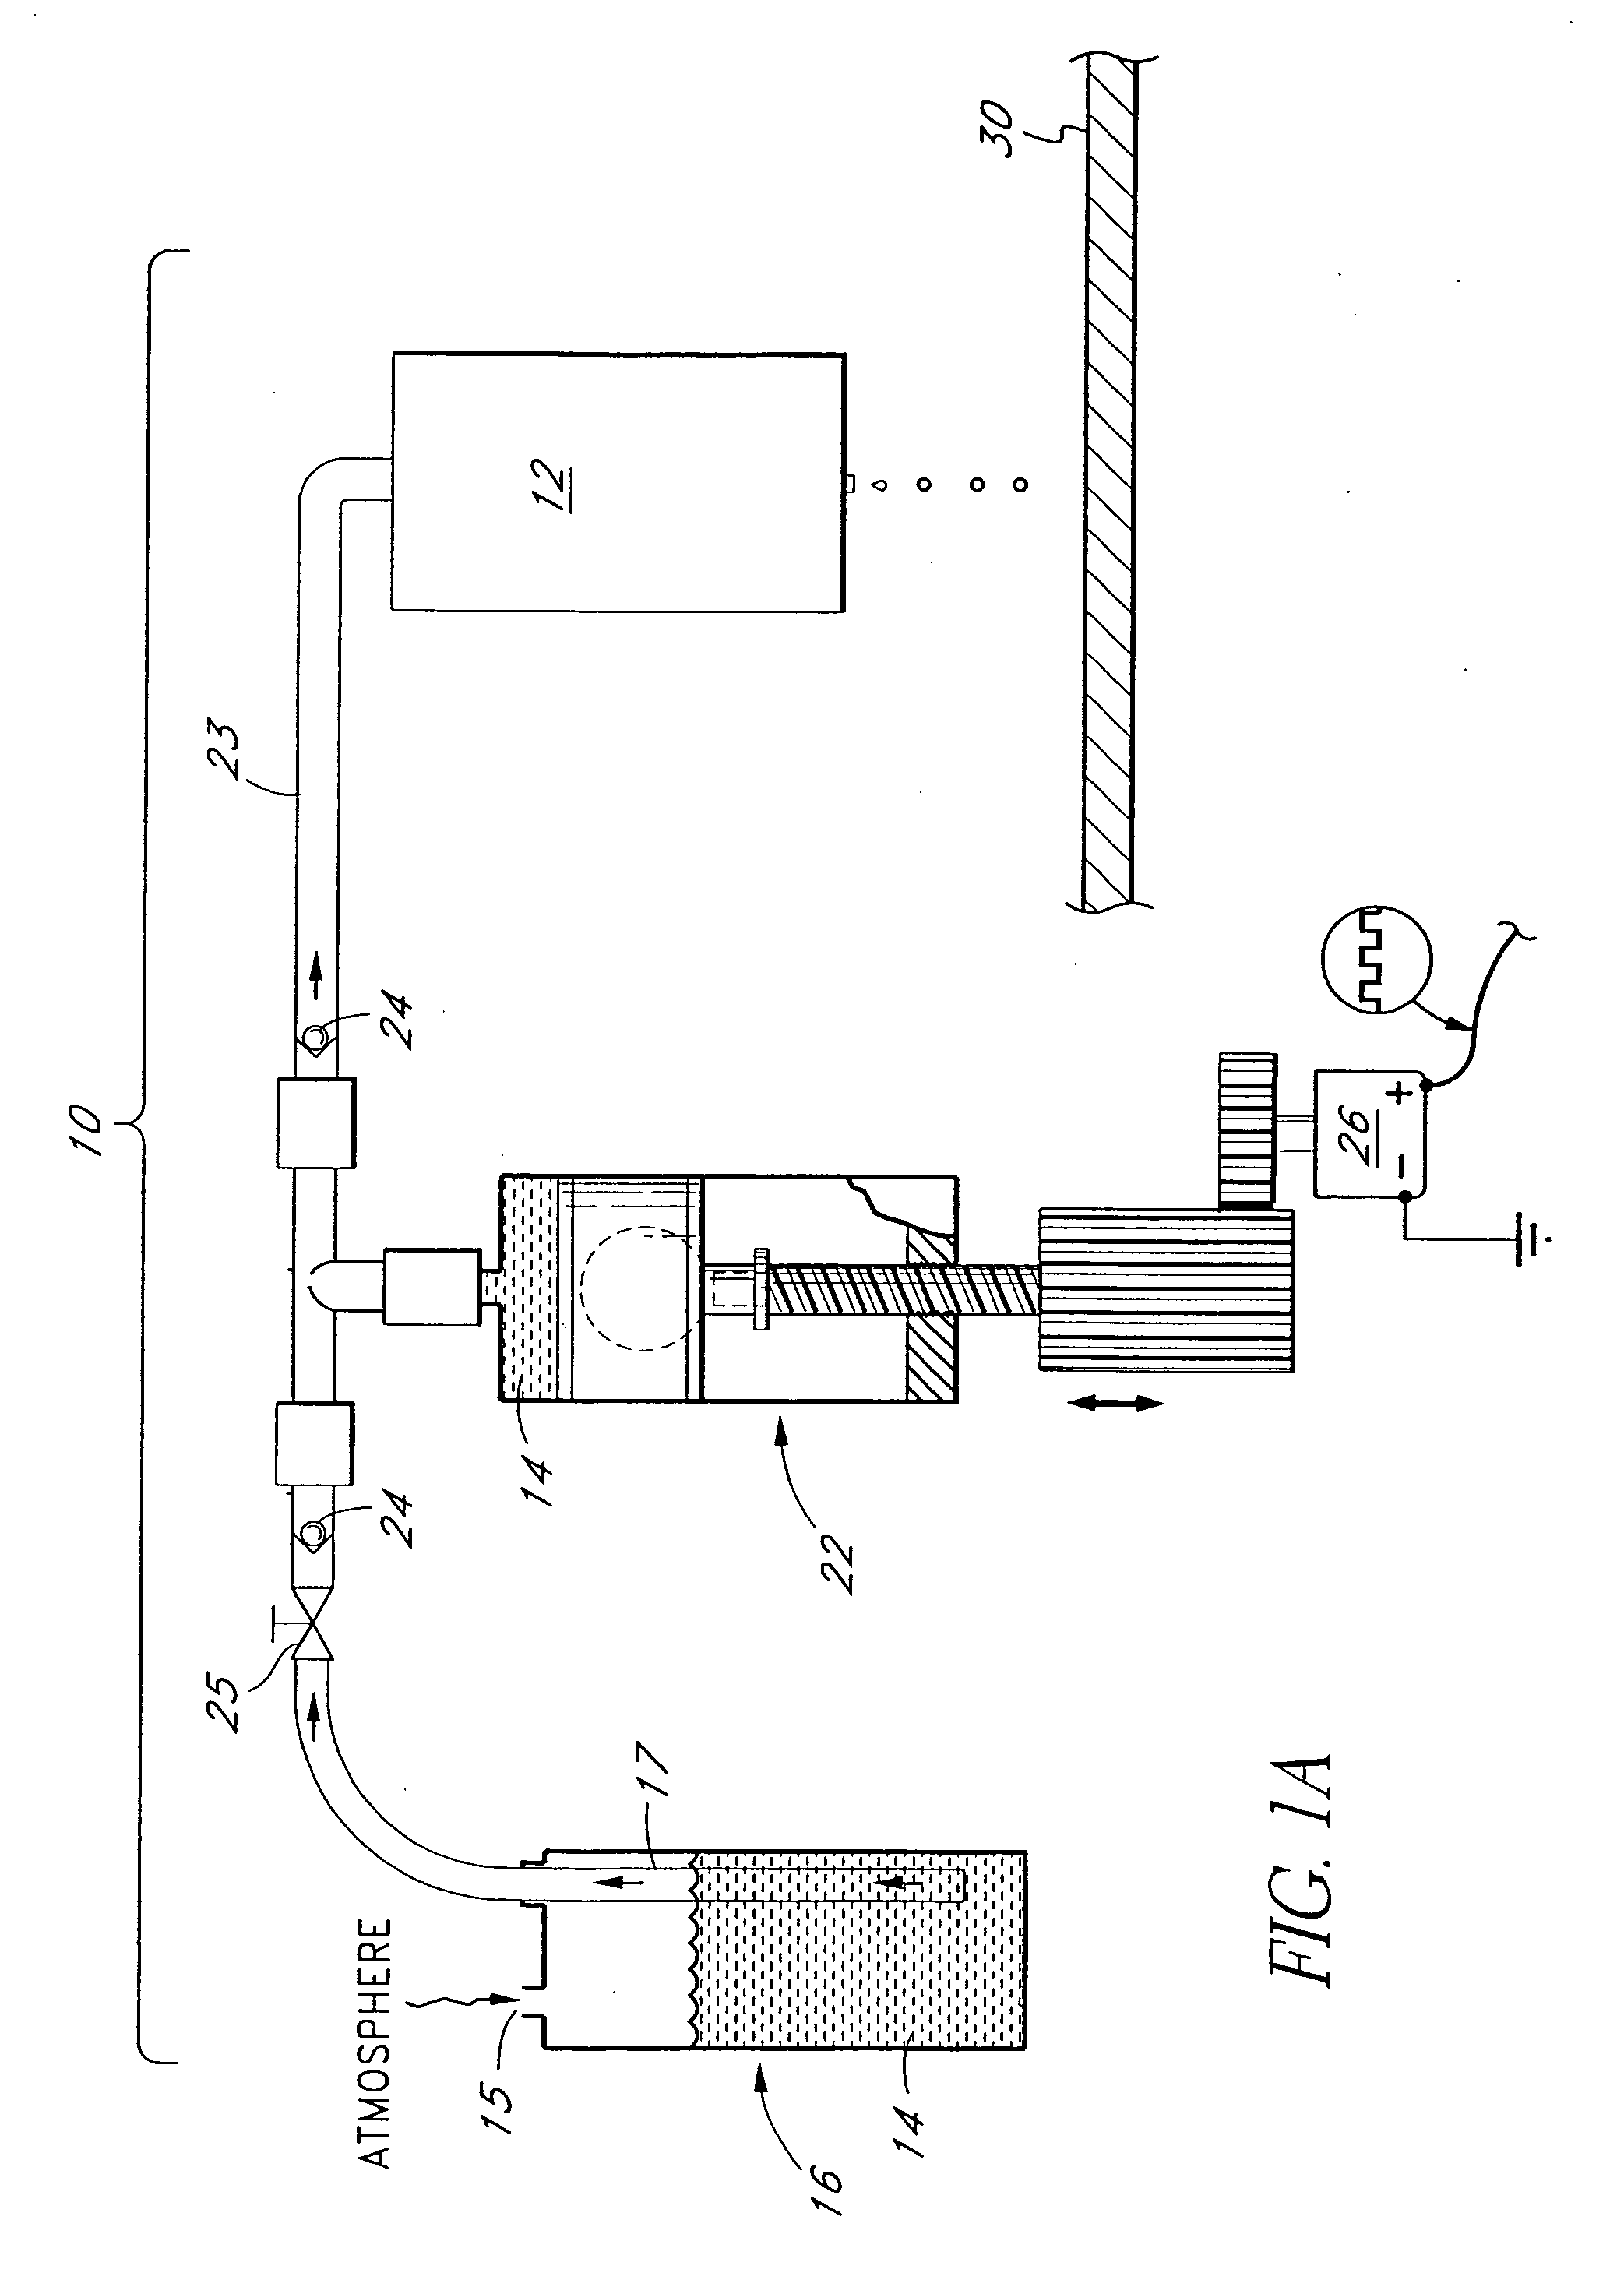 Method for dispensing reagent onto a substrate